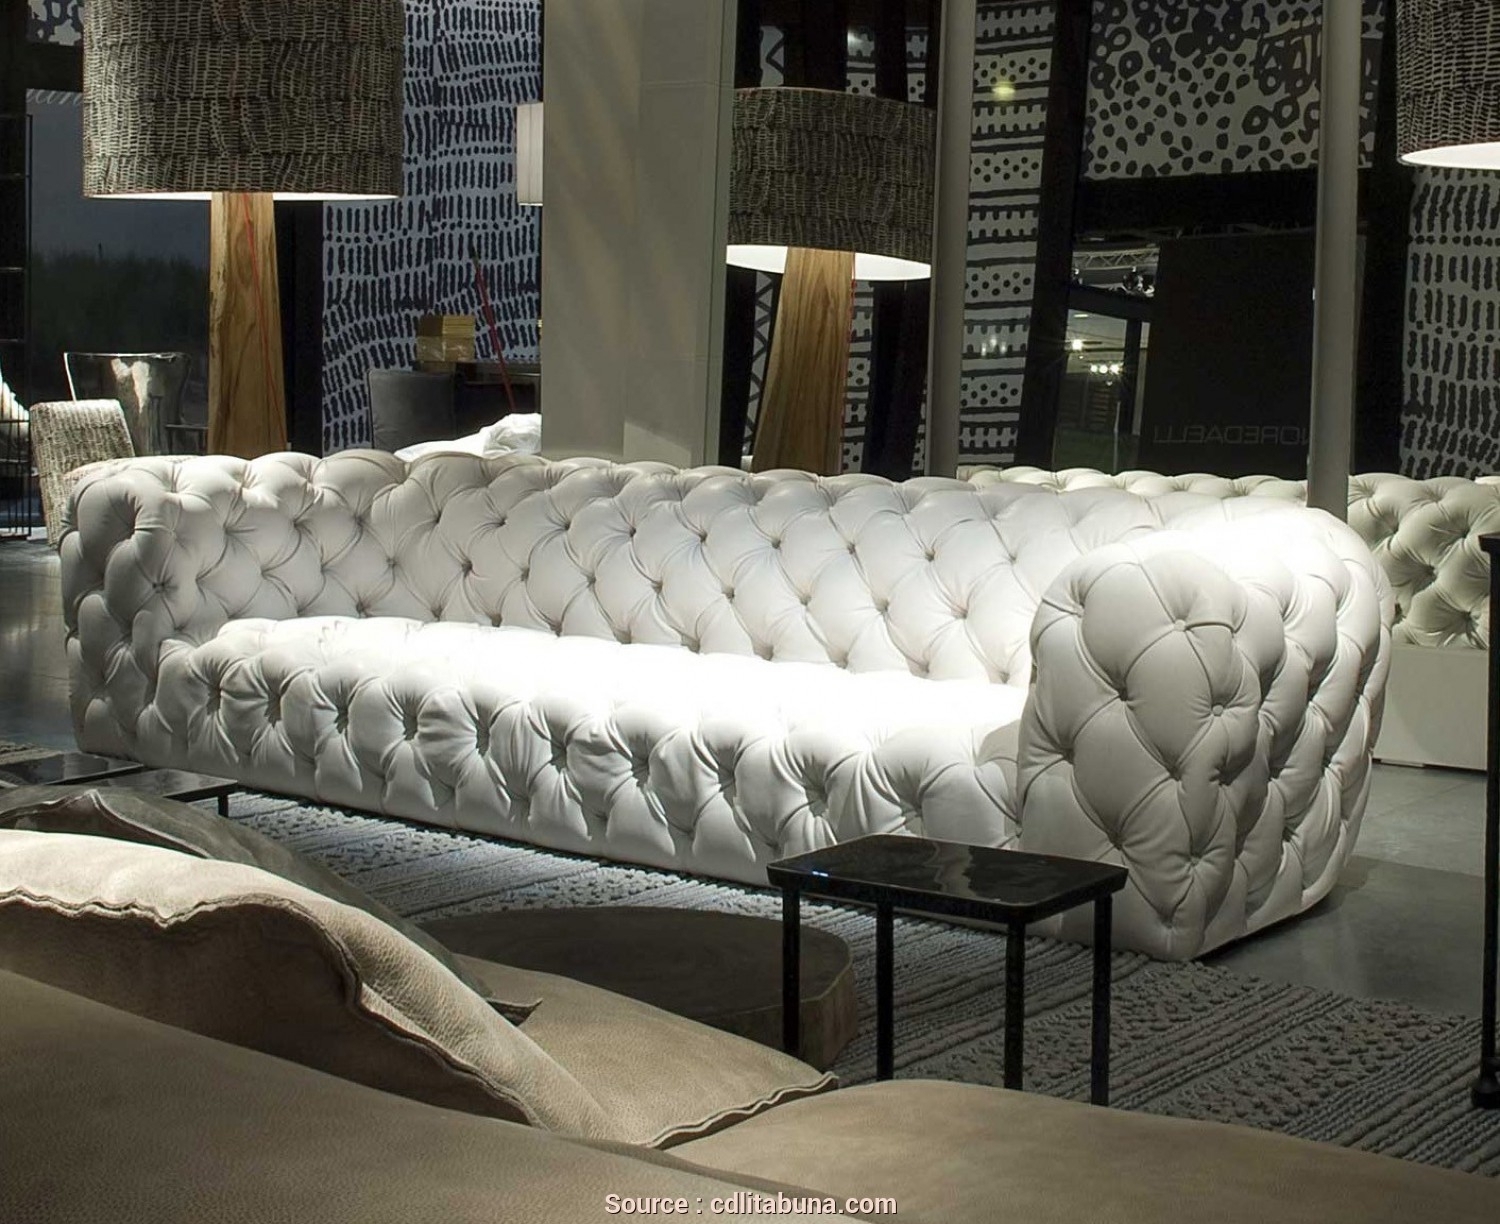 Tufted White Leather Sofa Foter